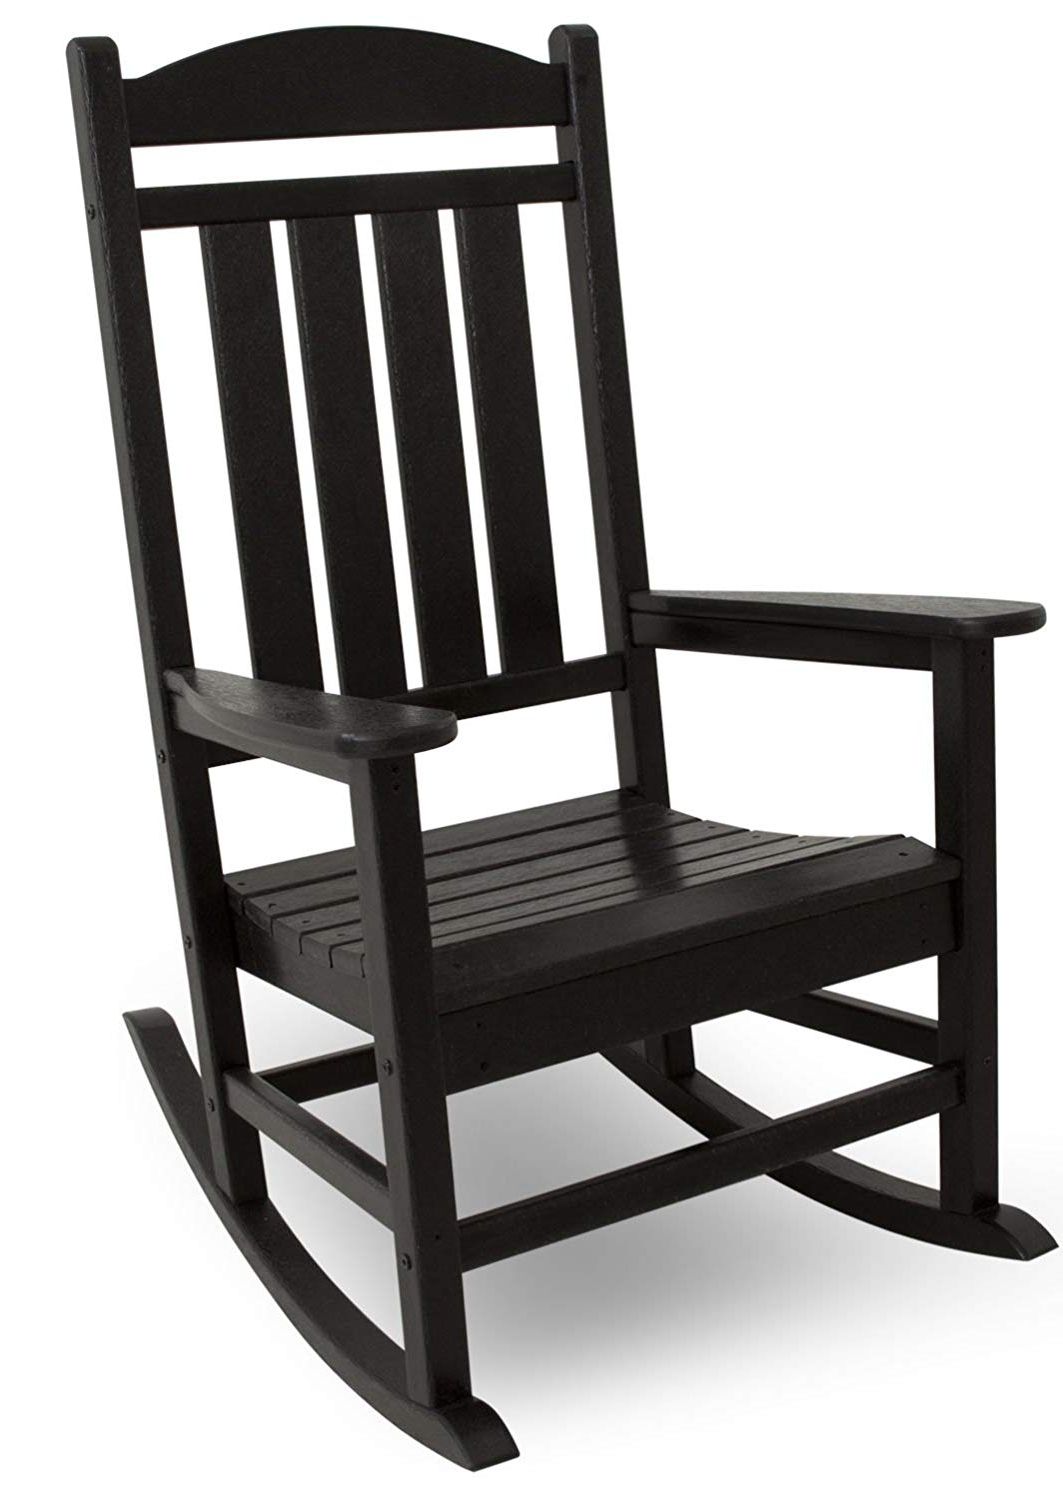 Famous Amazon : Polywood R100bl Presidential Outdoor Rocking Chair Regarding Black Rocking Chairs (View 13 of 15)